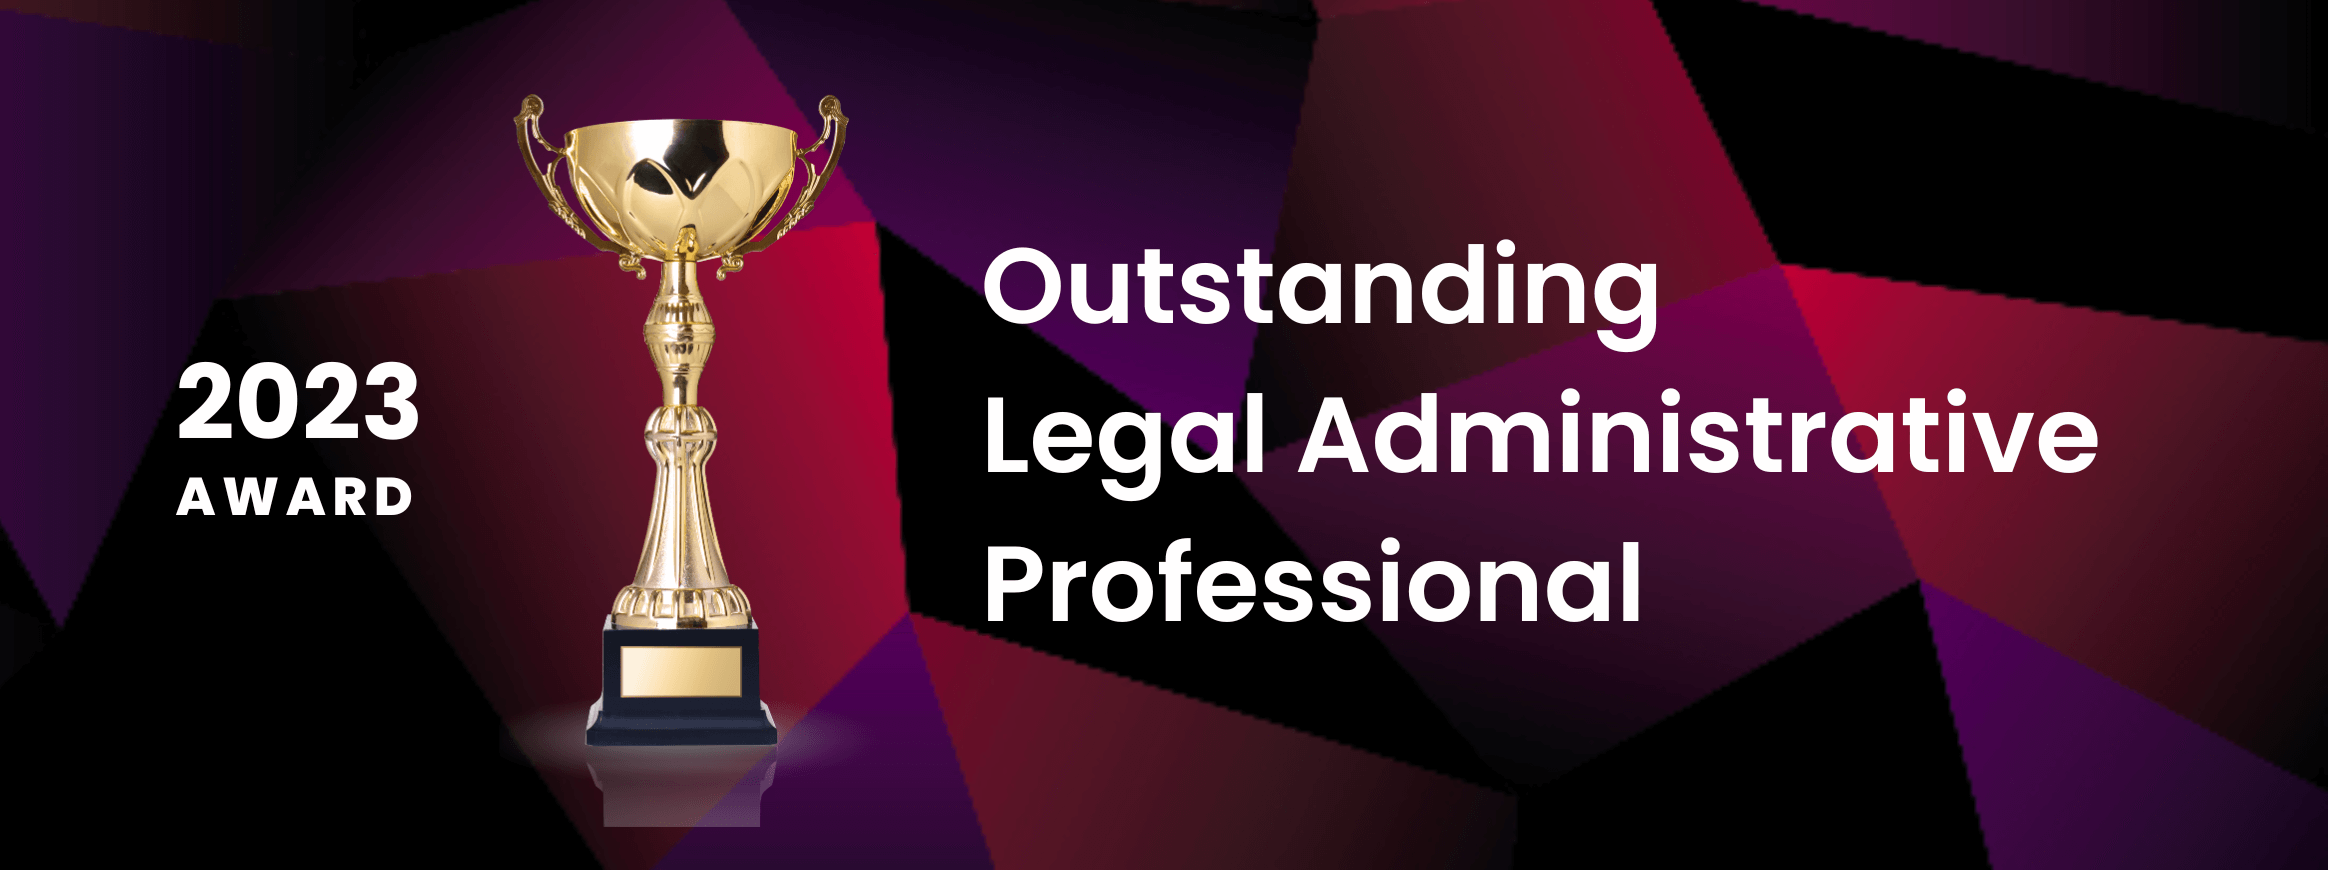 Award of Outstanding Legal Administrative Professional